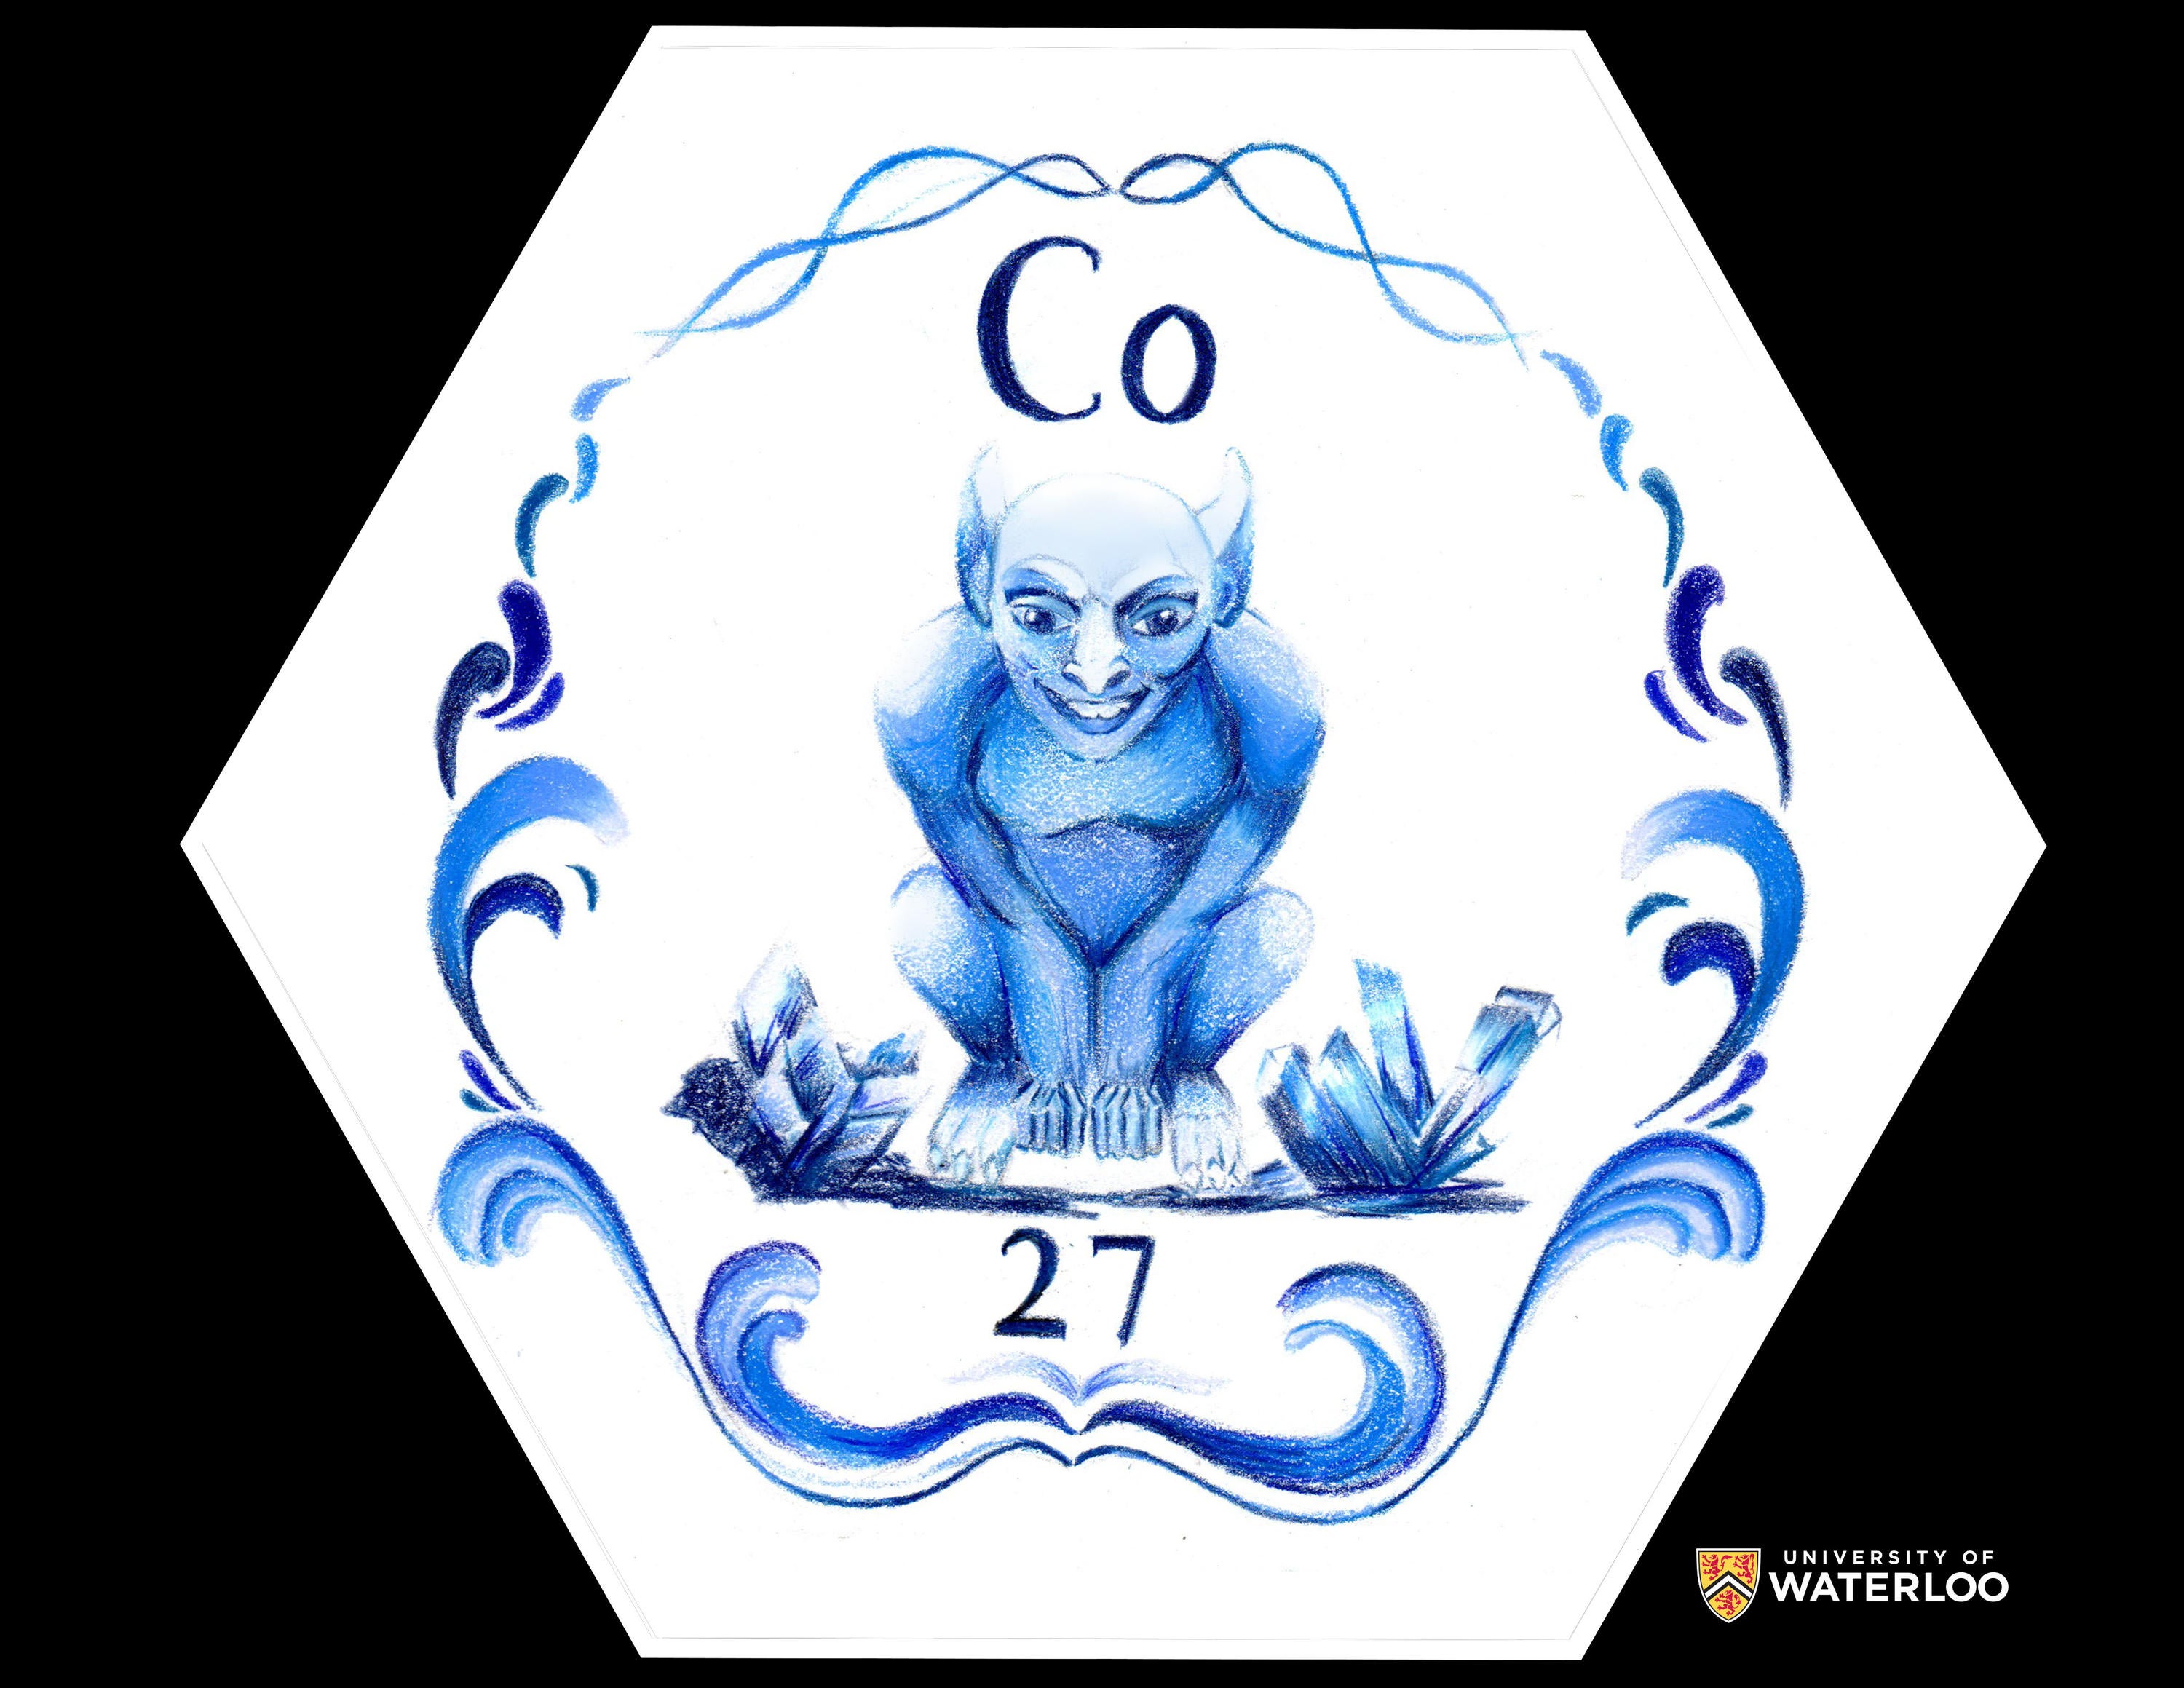 Shades of blue pencil on paper. Design is reminiscent of an 18th century Delft blue tiles. A smiling goblin featured centre with the chemical symbol “Co” above and atomic number “27” below. On either side of the goblin are crystals, all surrounded by a traditional swirling patterned border.